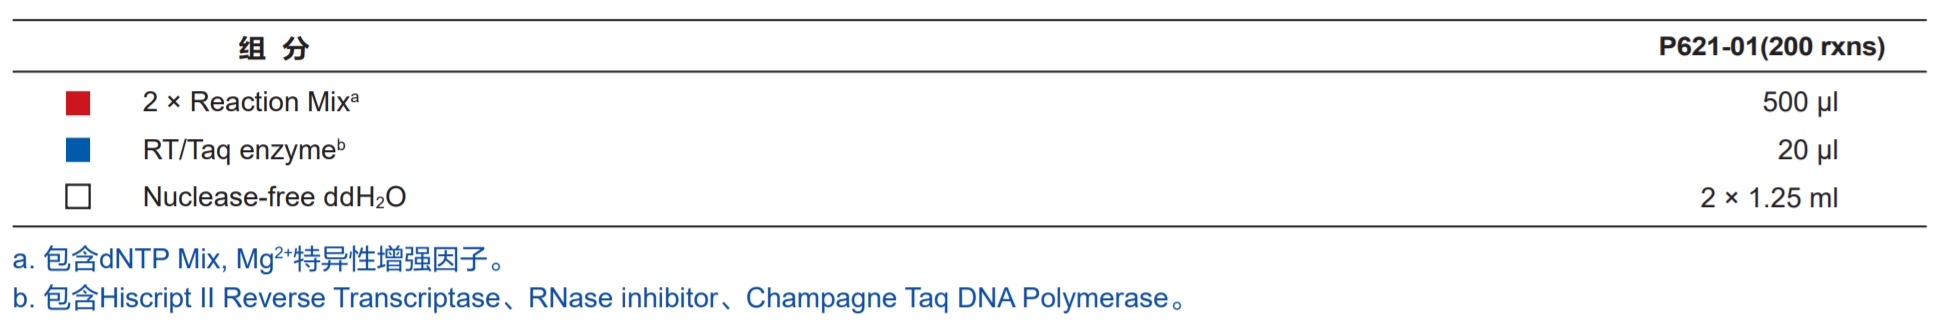 Single Cell Sequence Specific Amplification Kit